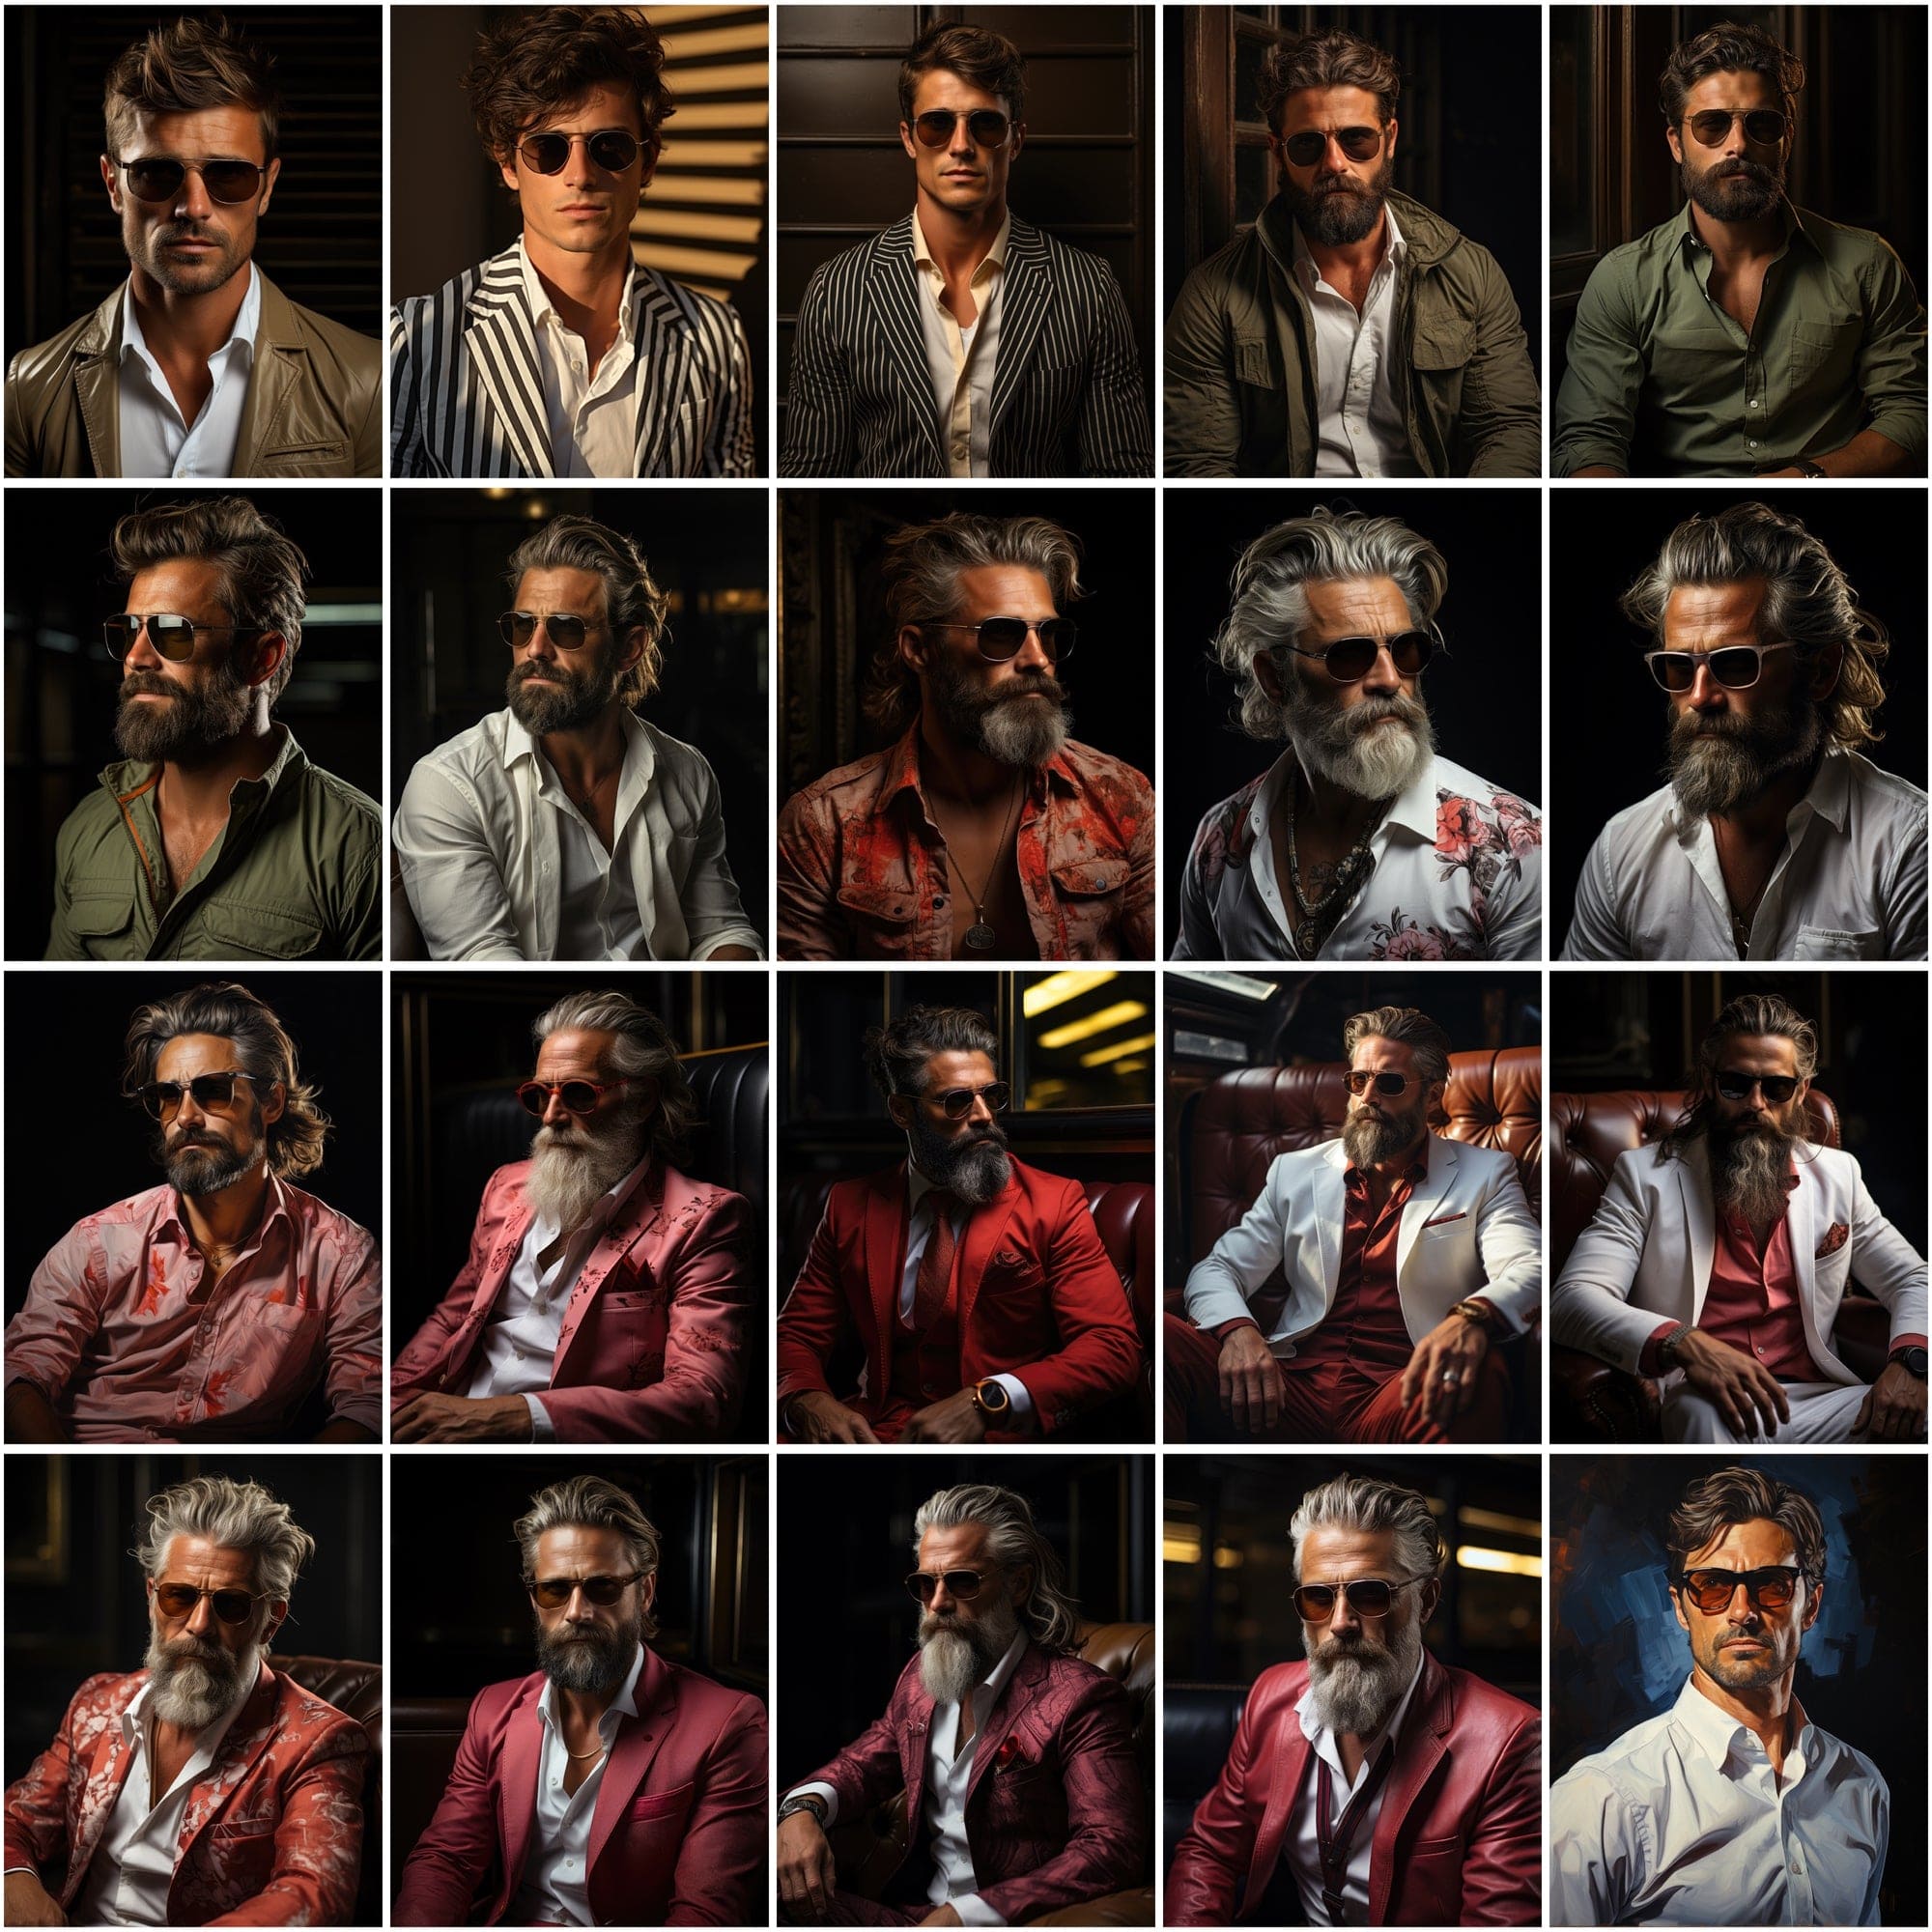 187 Premium PNG Images of Fashionable Men, Colorful High-Resolution Portraits, Commercial License Included Digital Download Sumobundle